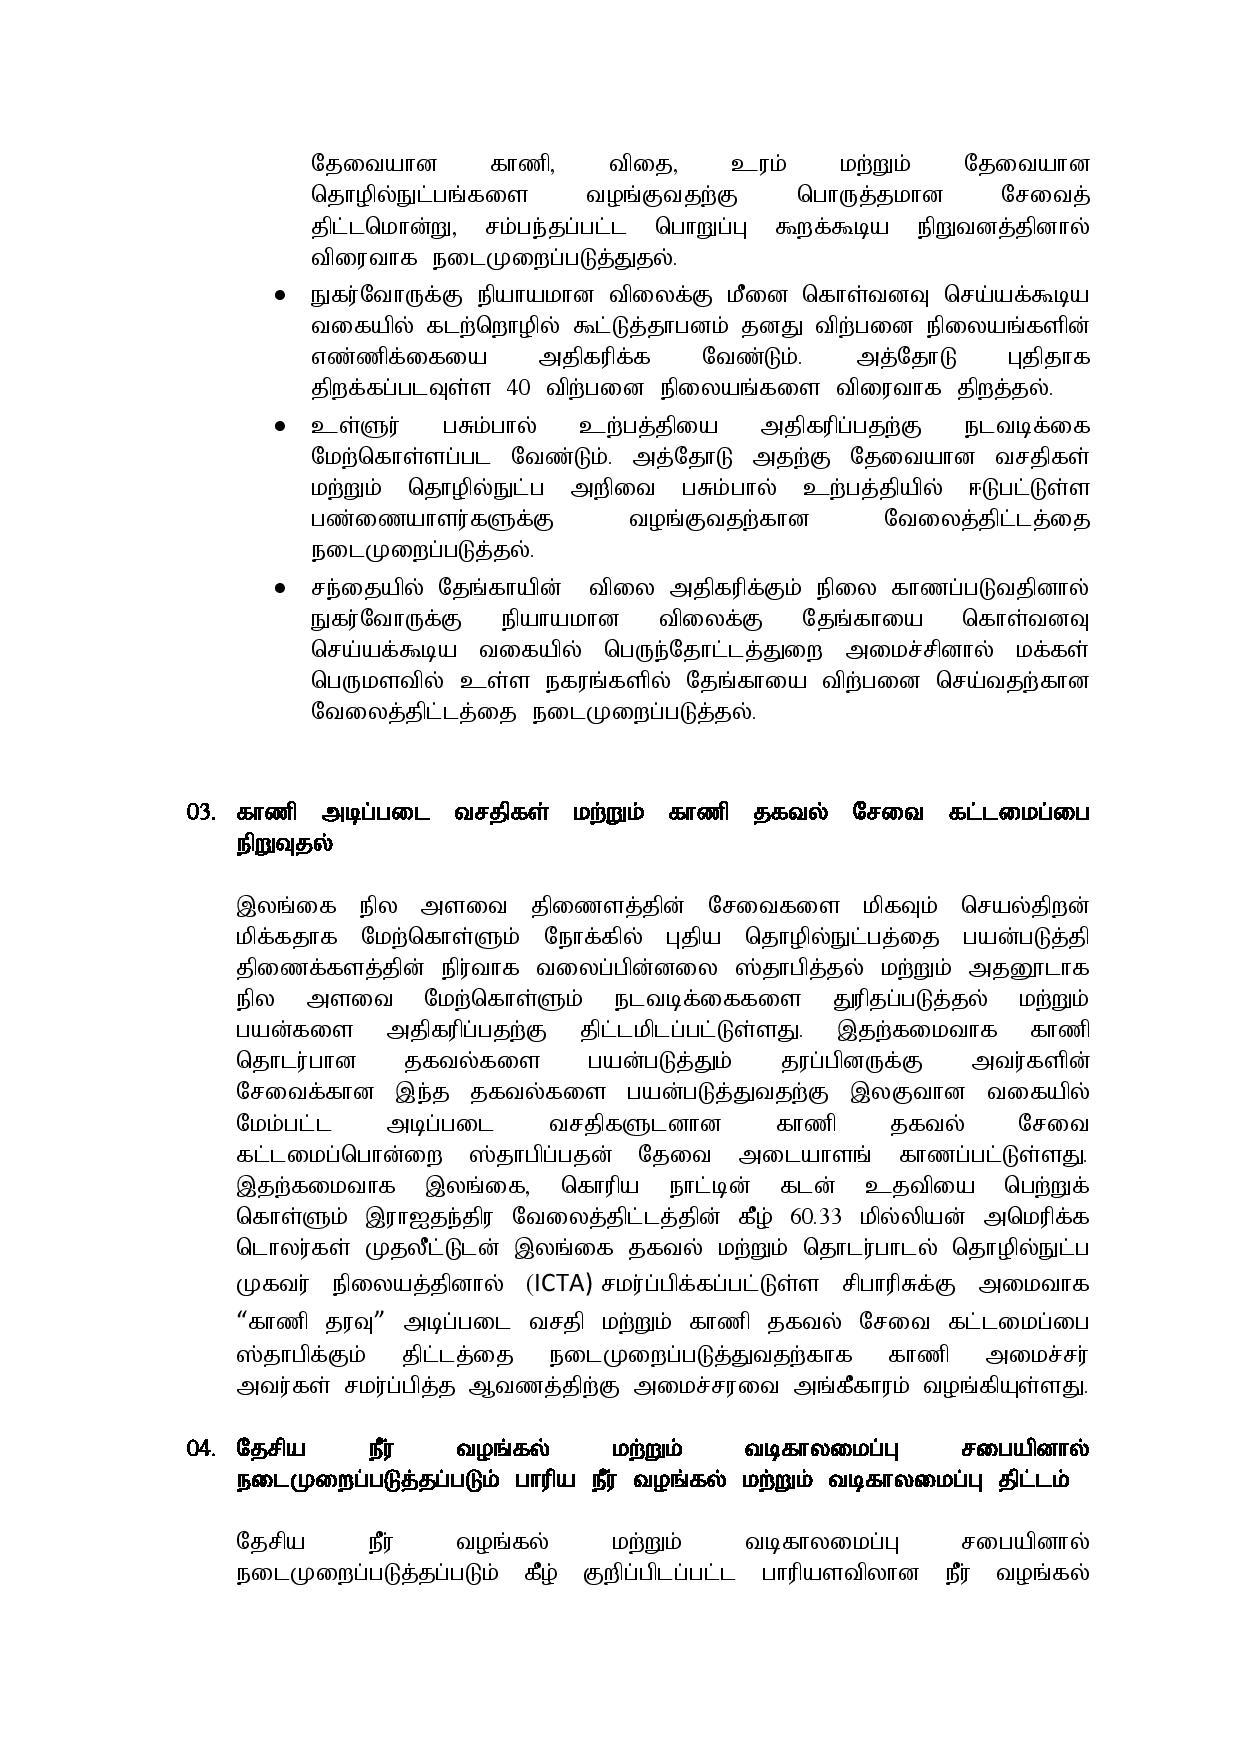 21.09.2020 Cabinet tamil 1 page 003